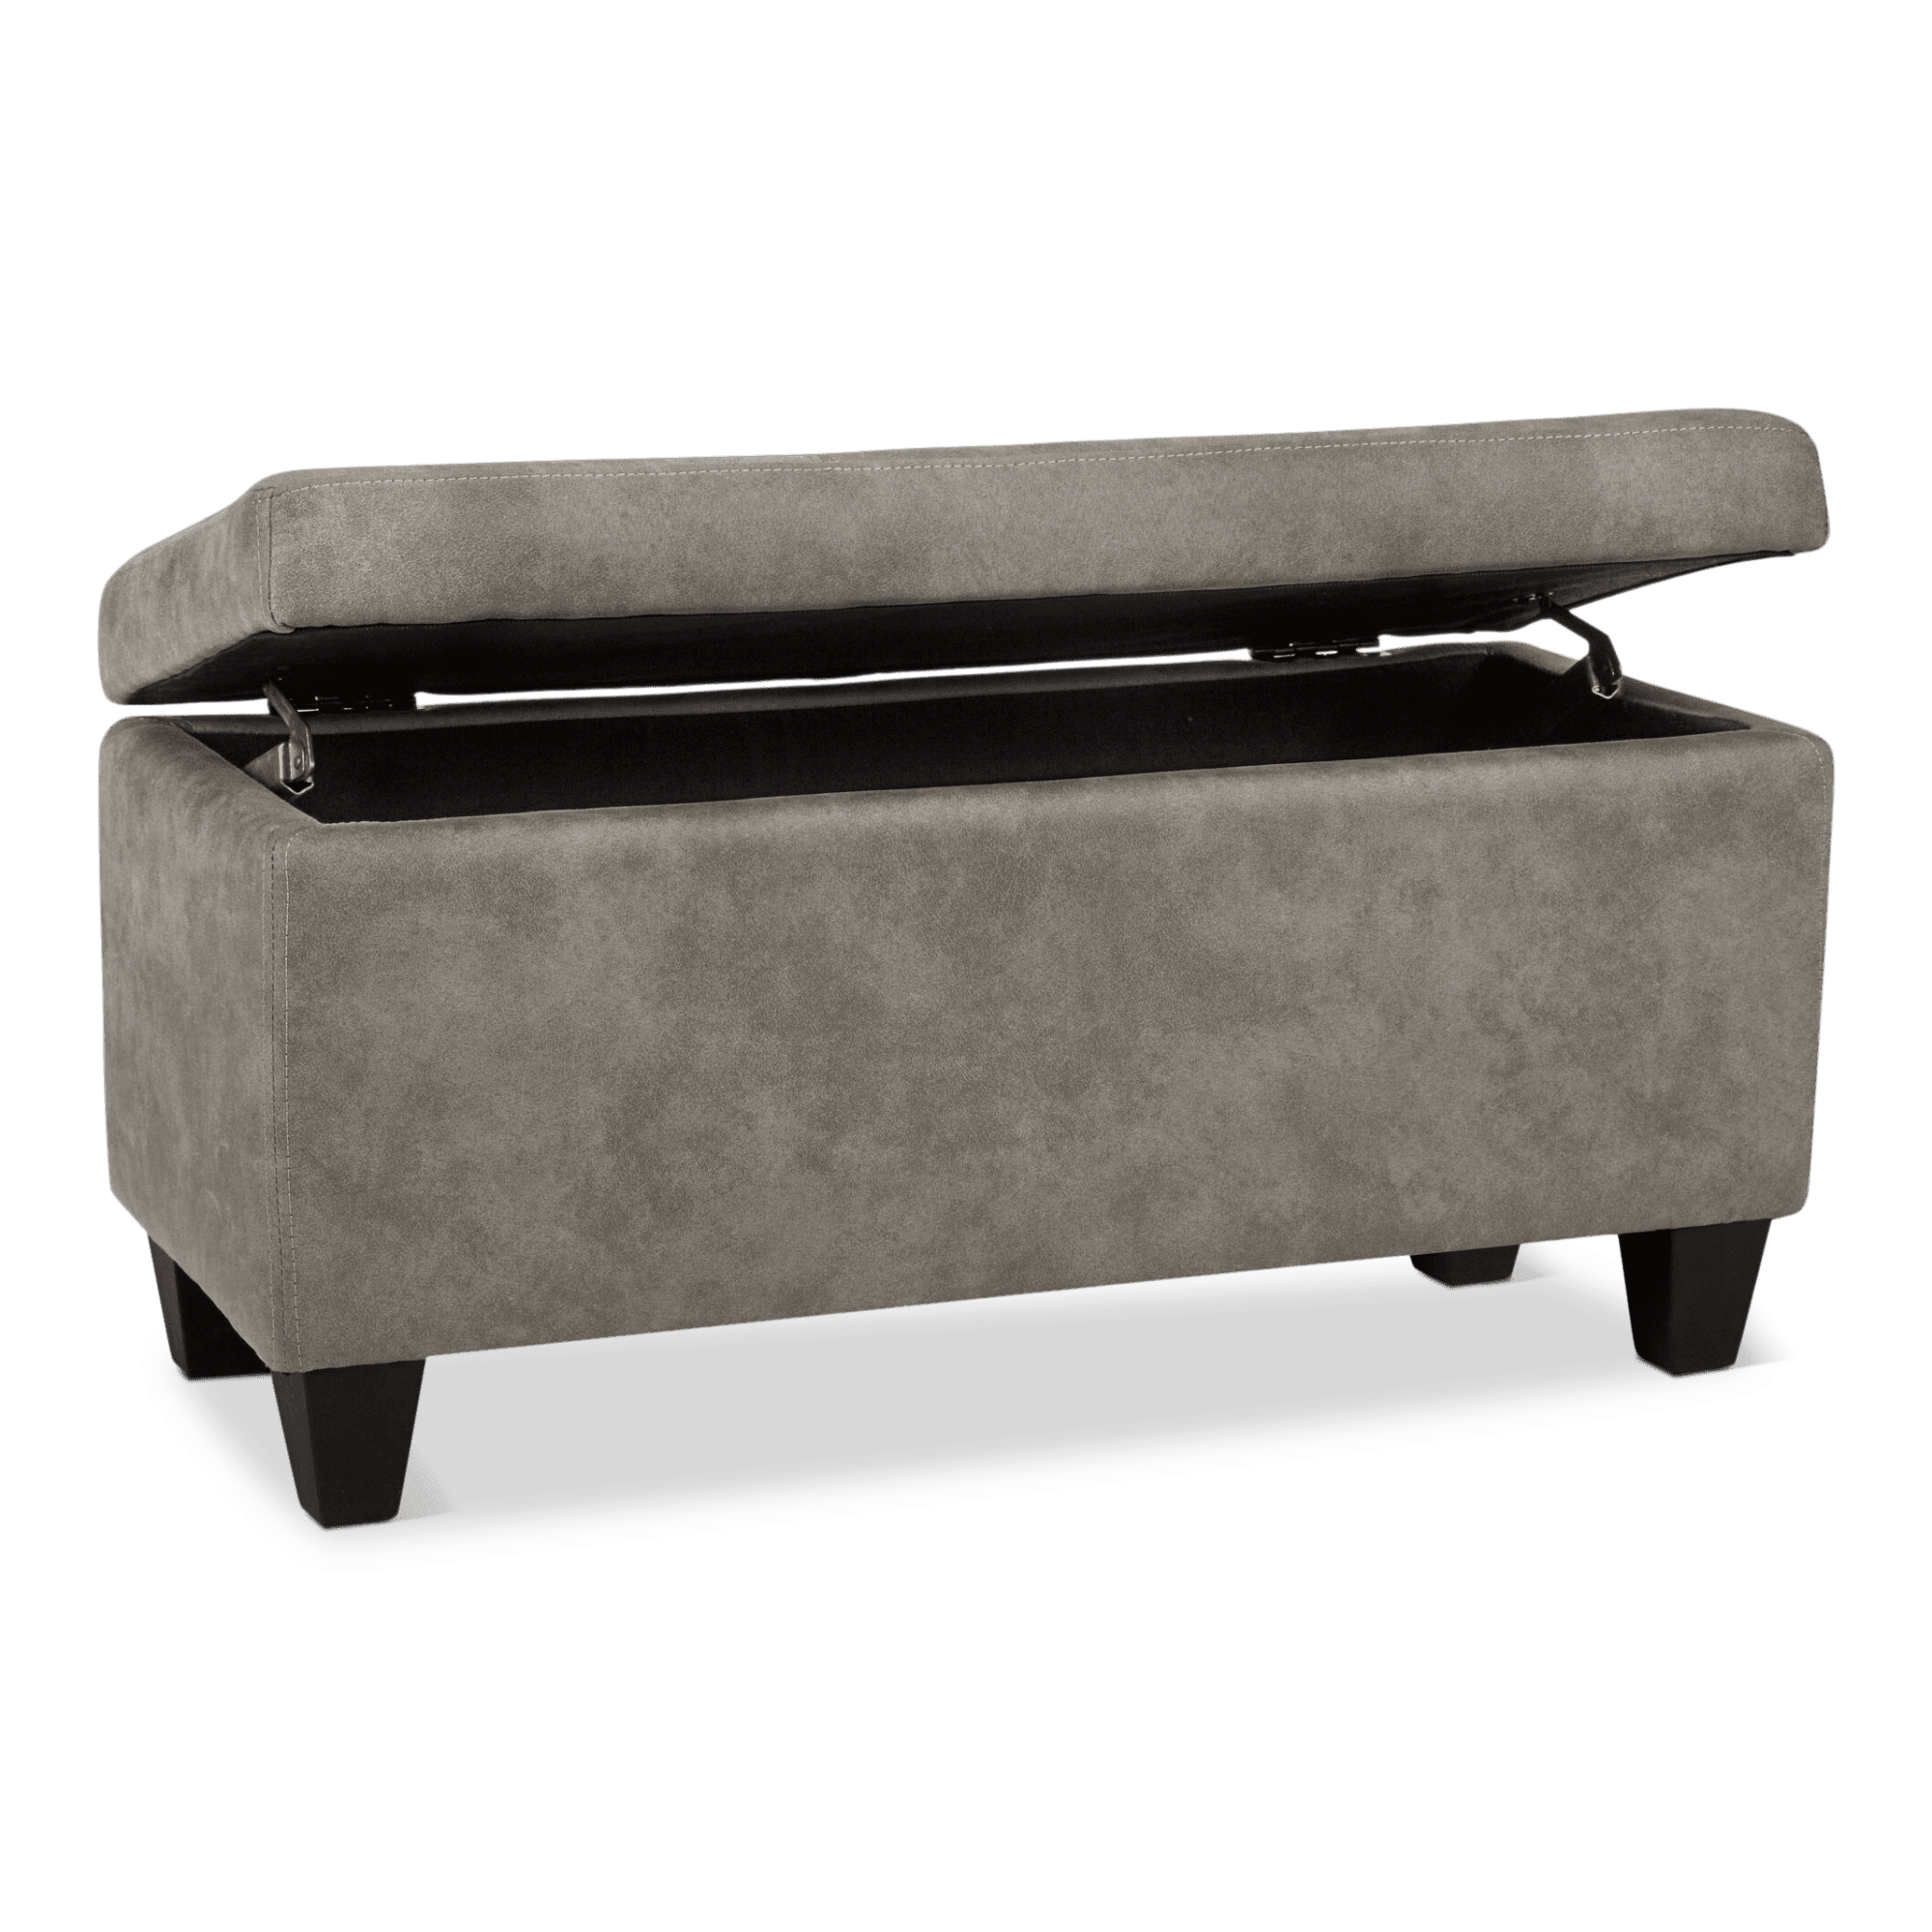 Textured Faux Leather Storage Bench